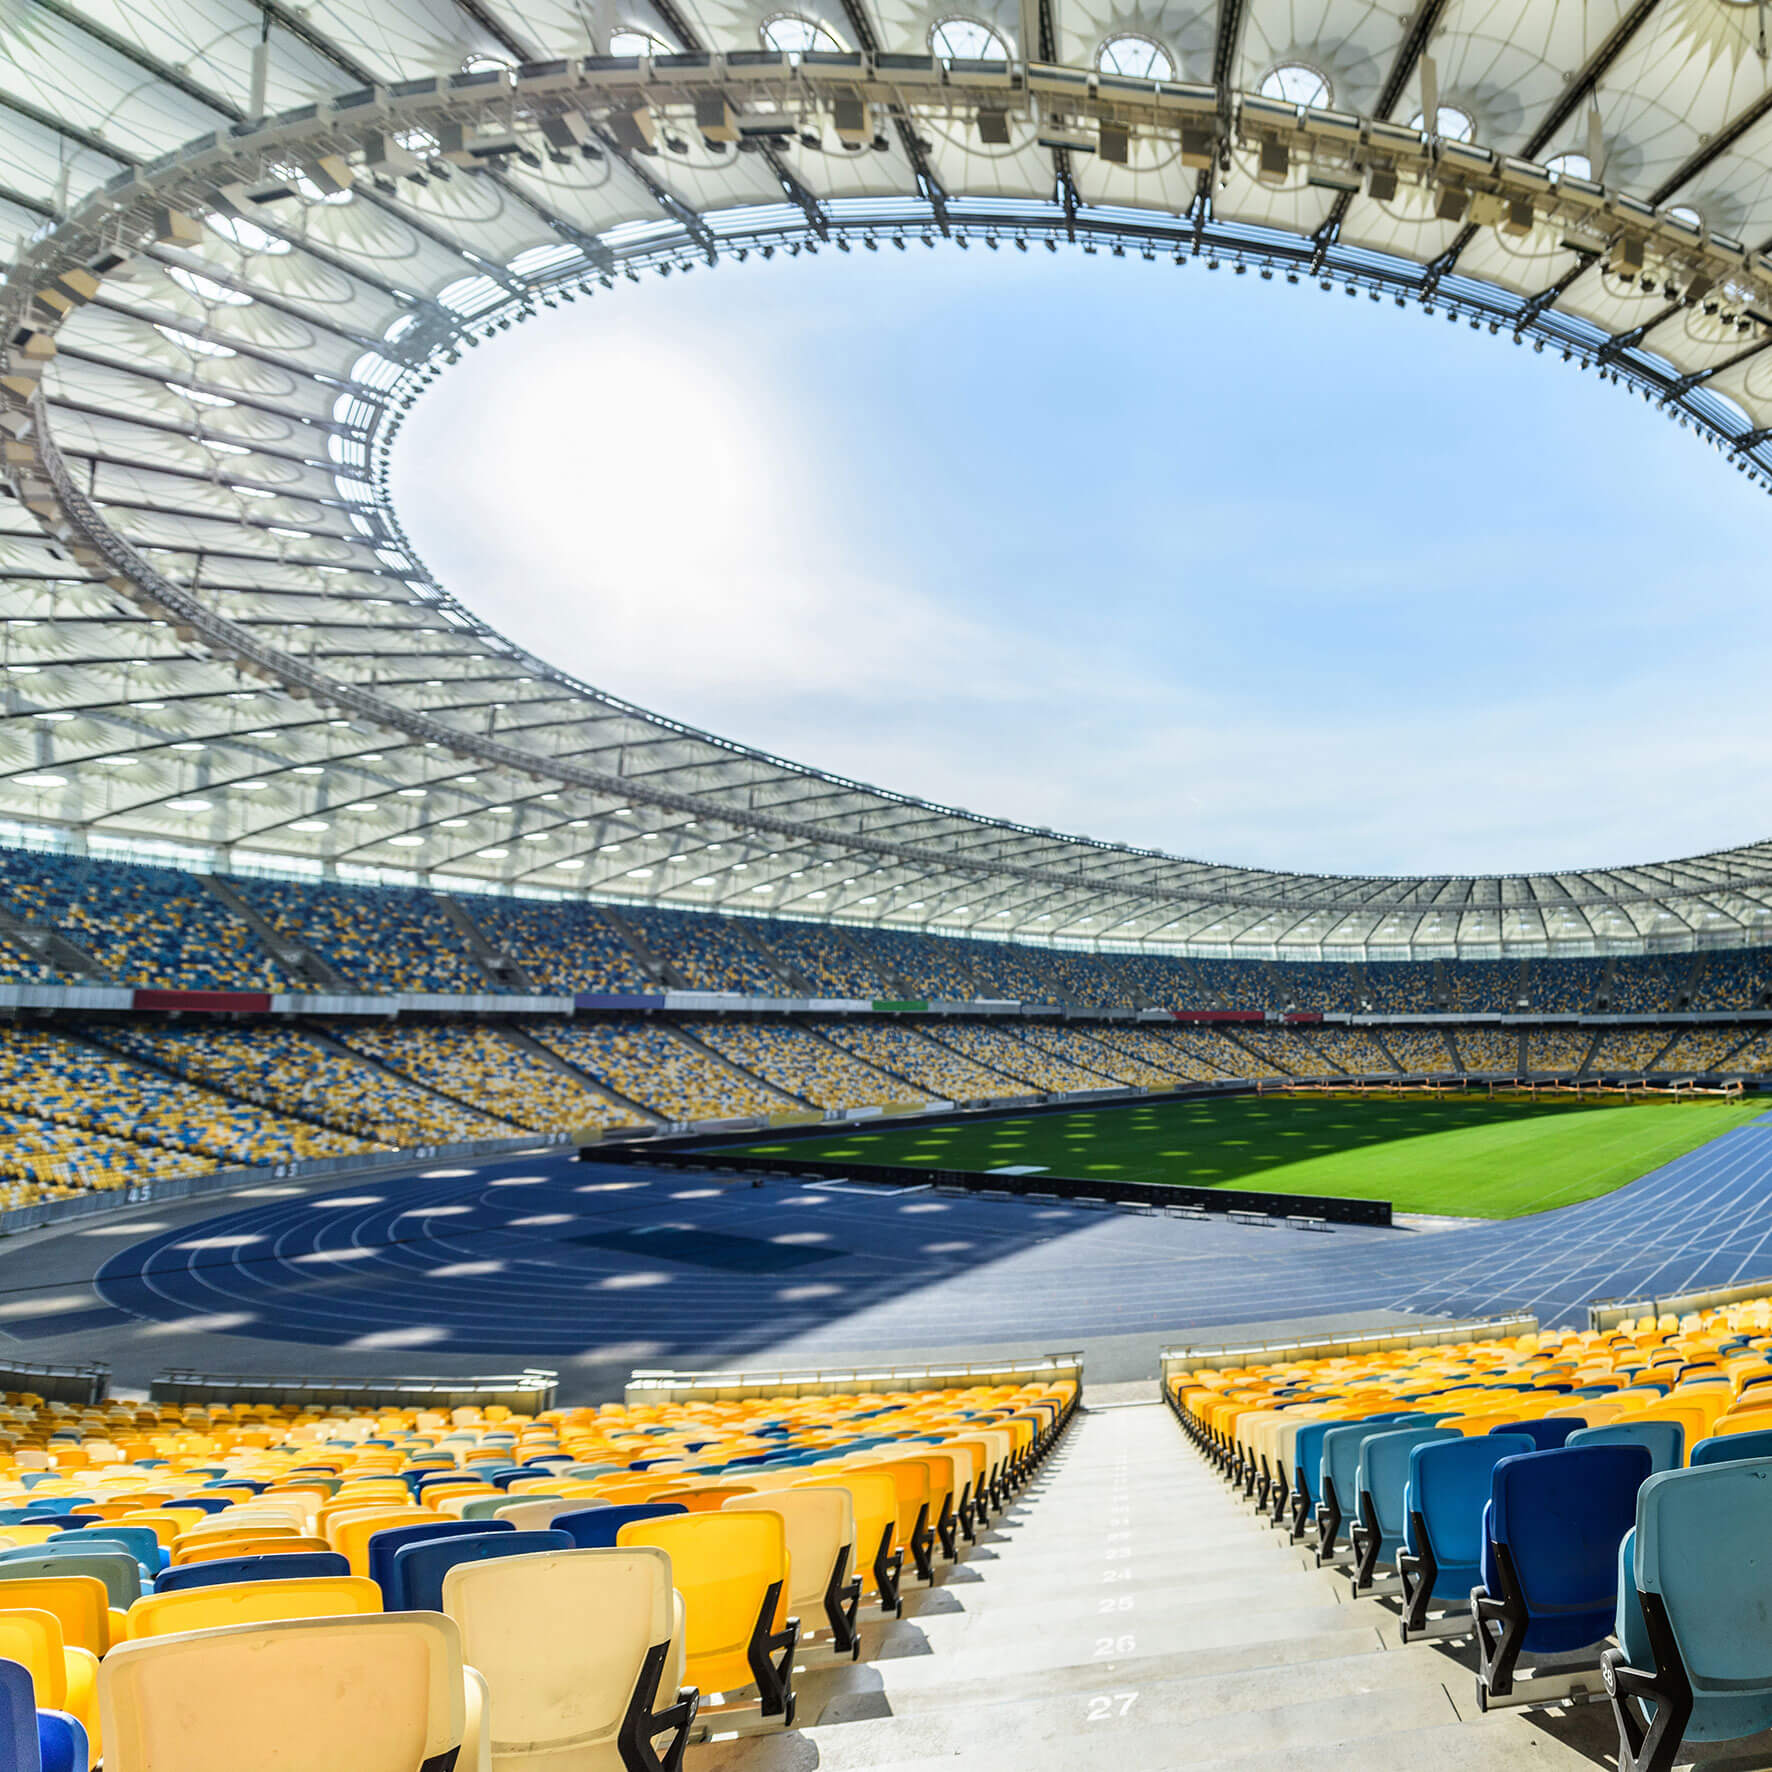 An image of a football stadium being constructed, a visual metaphor for the topic of this article, Navigating Stadium Development Projects for Football Clubs